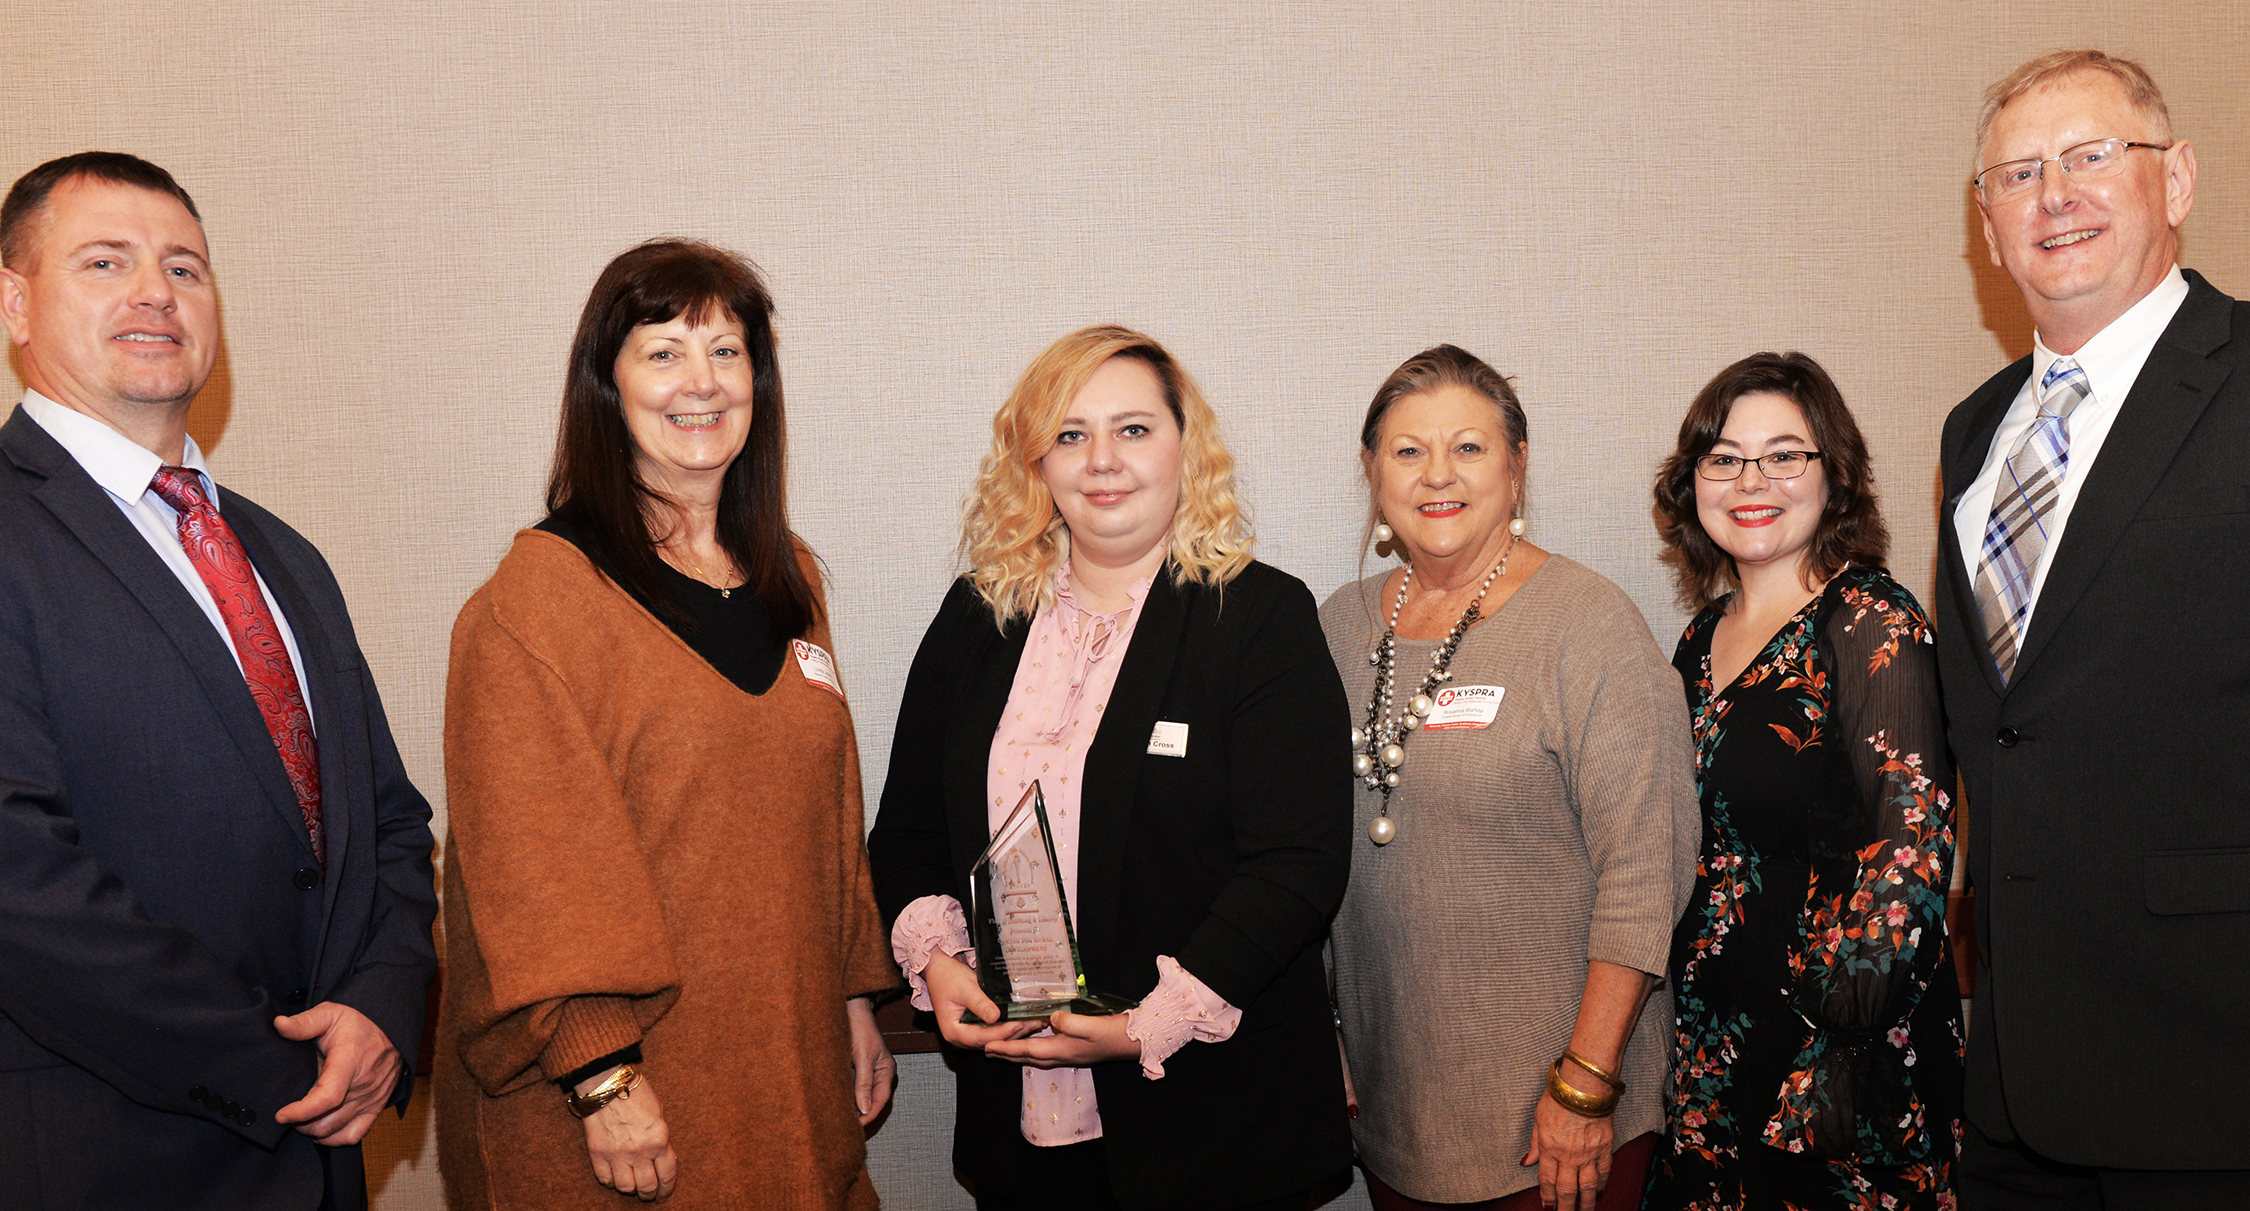 The Center for Rural Development receives KYSPRA Flag of Learning and Liberty Award